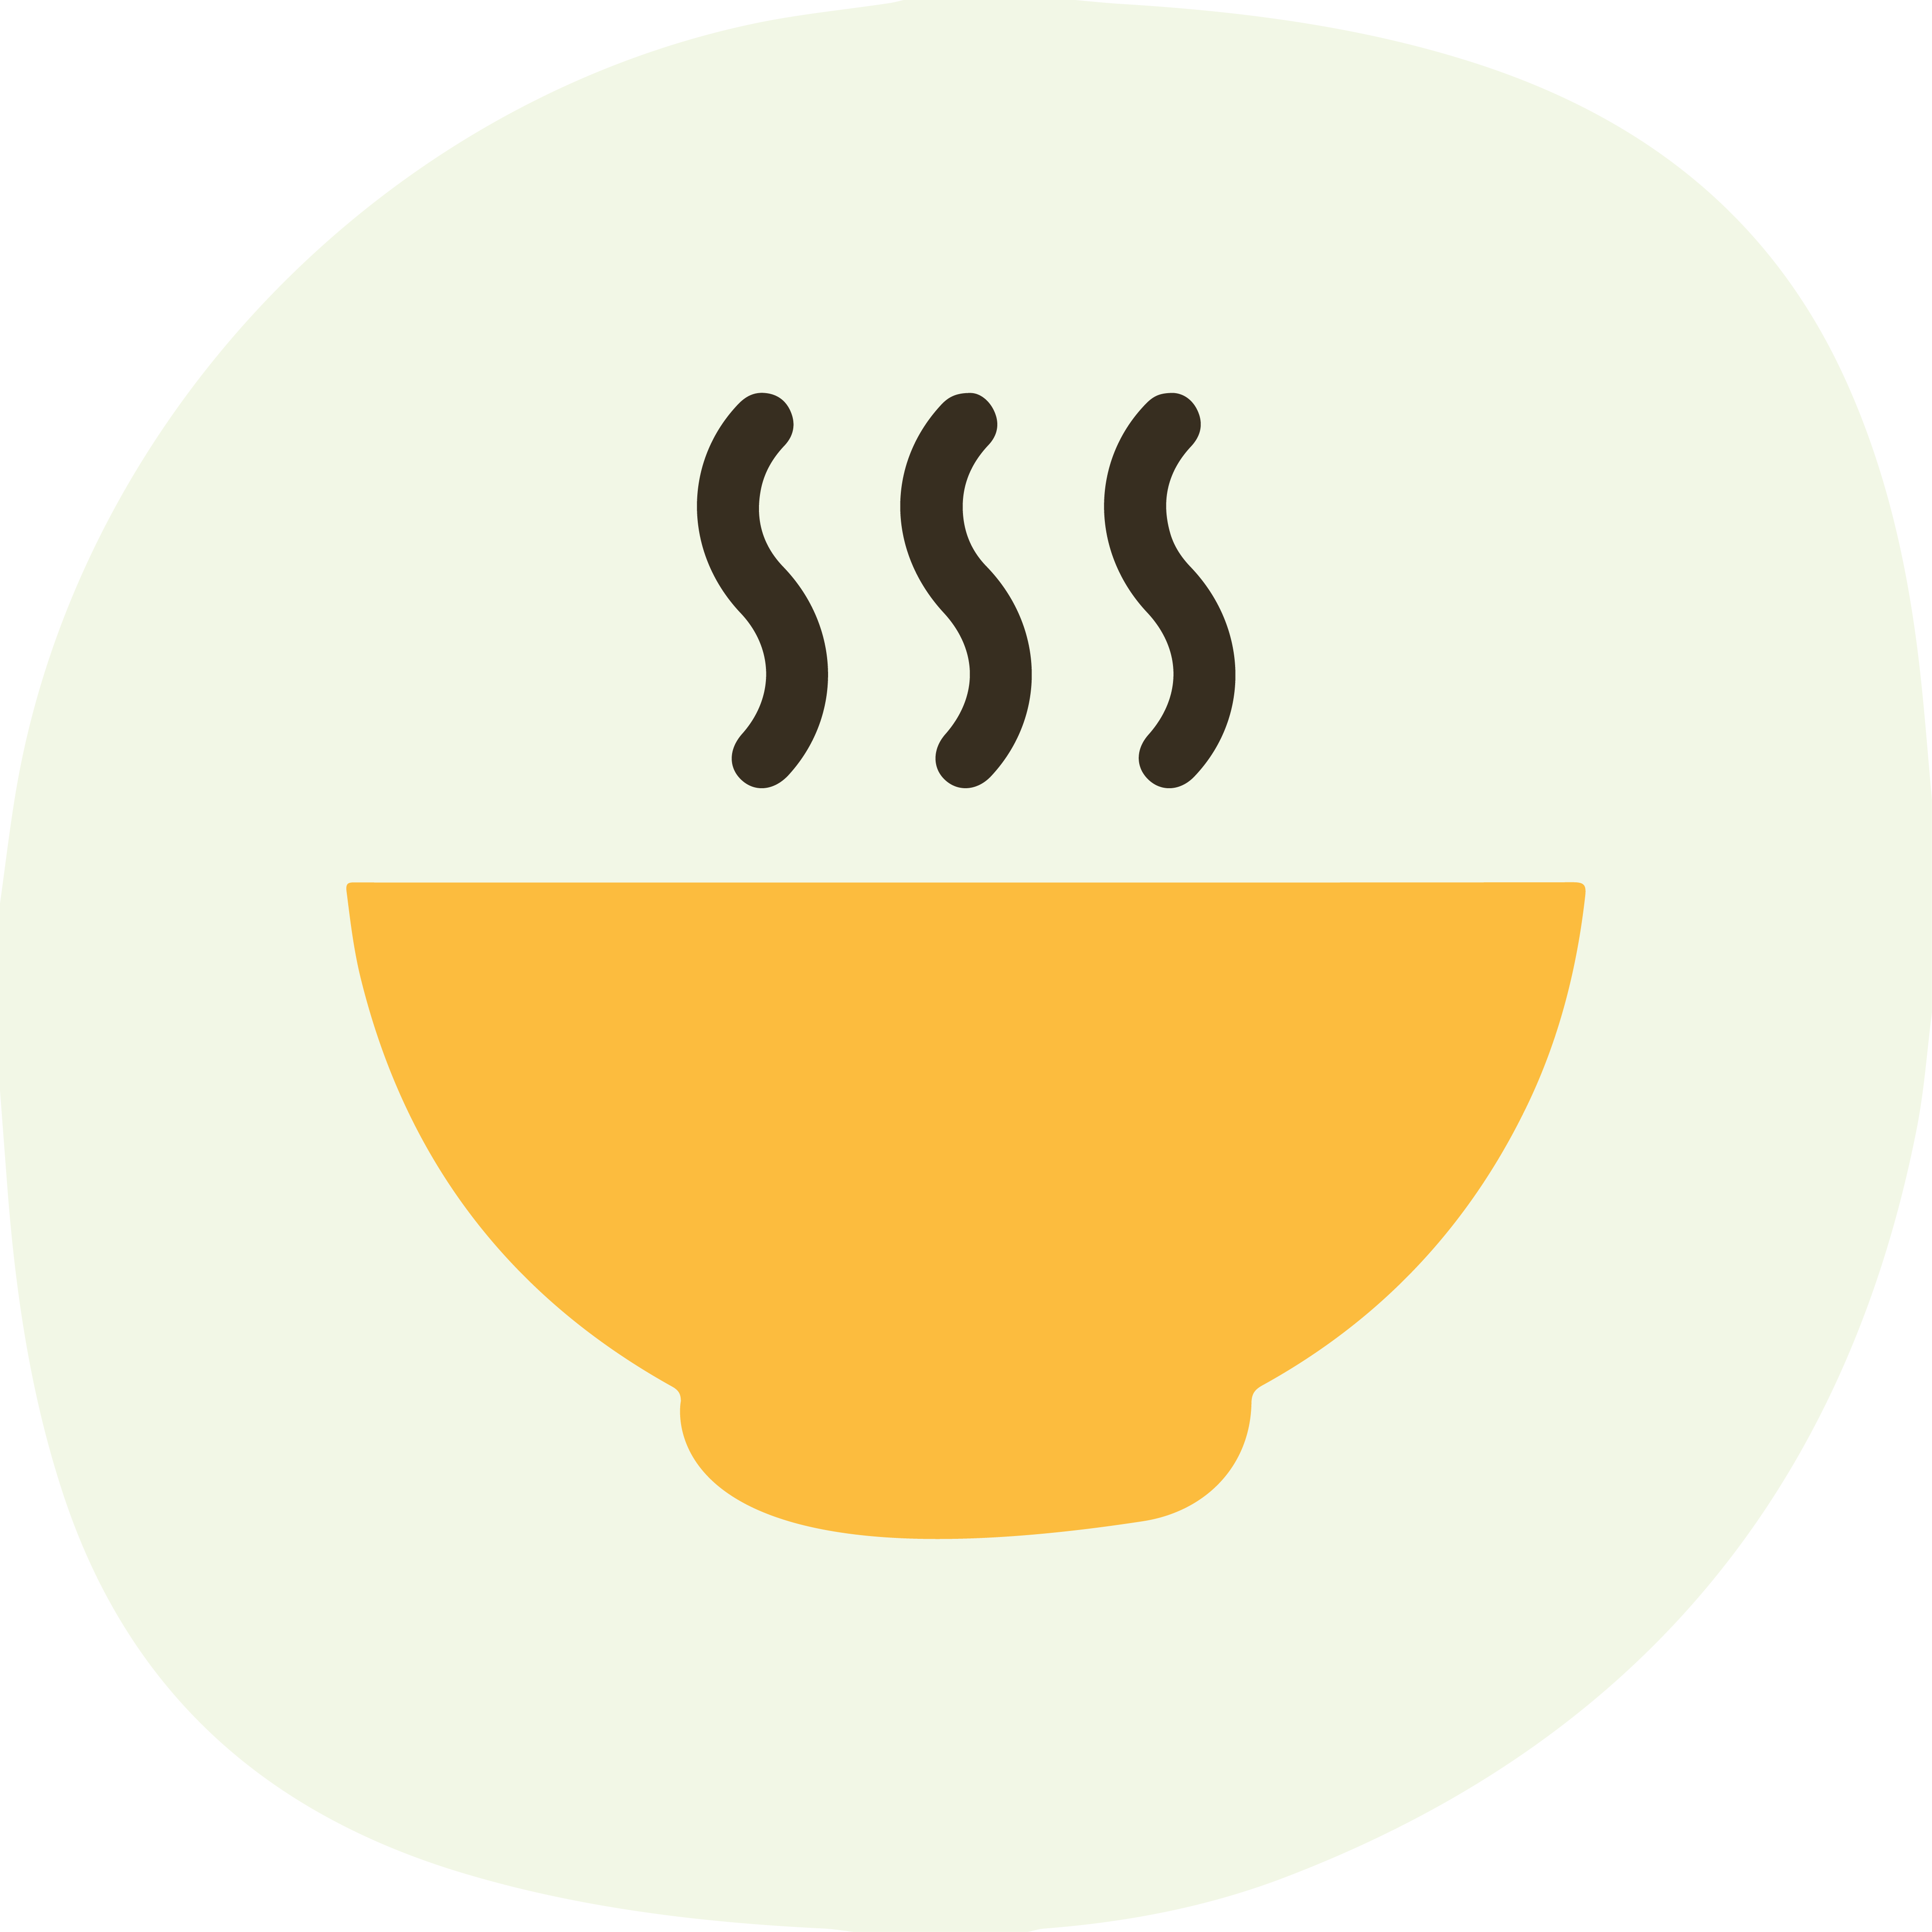 Warm meal icon with a light green background.